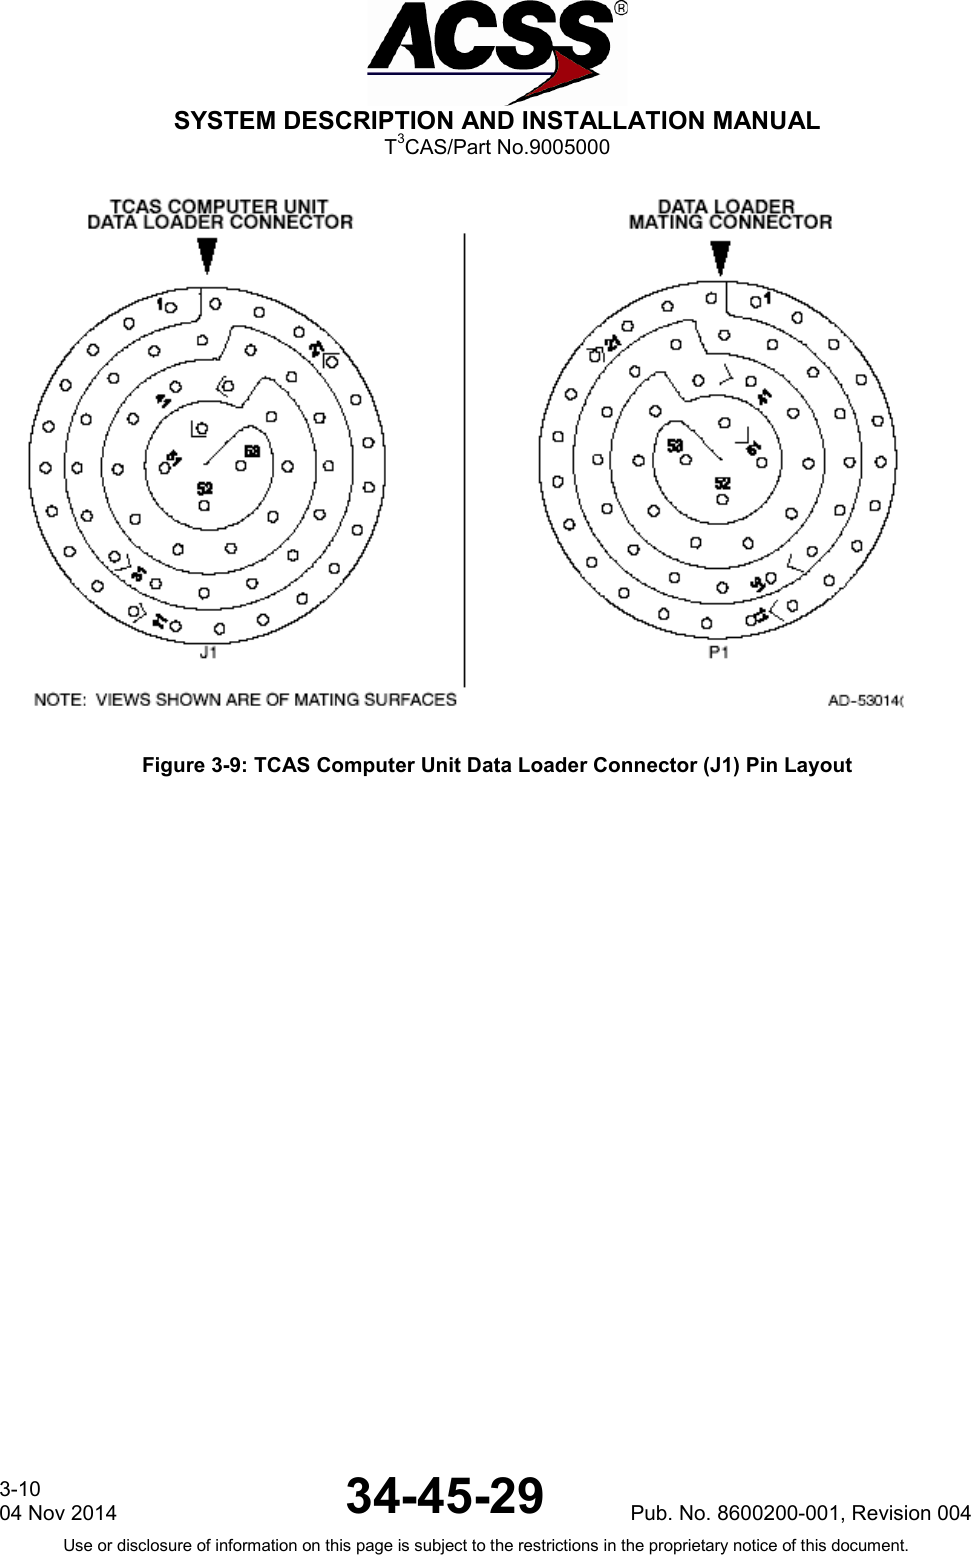  SYSTEM DESCRIPTION AND INSTALLATION MANUAL T3CAS/Part No.9005000  Figure 3-9: TCAS Computer Unit Data Loader Connector (J1) Pin Layout 3-10 04 Nov 2014 34-45-29 Pub. No. 8600200-001, Revision 004 Use or disclosure of information on this page is subject to the restrictions in the proprietary notice of this document.    